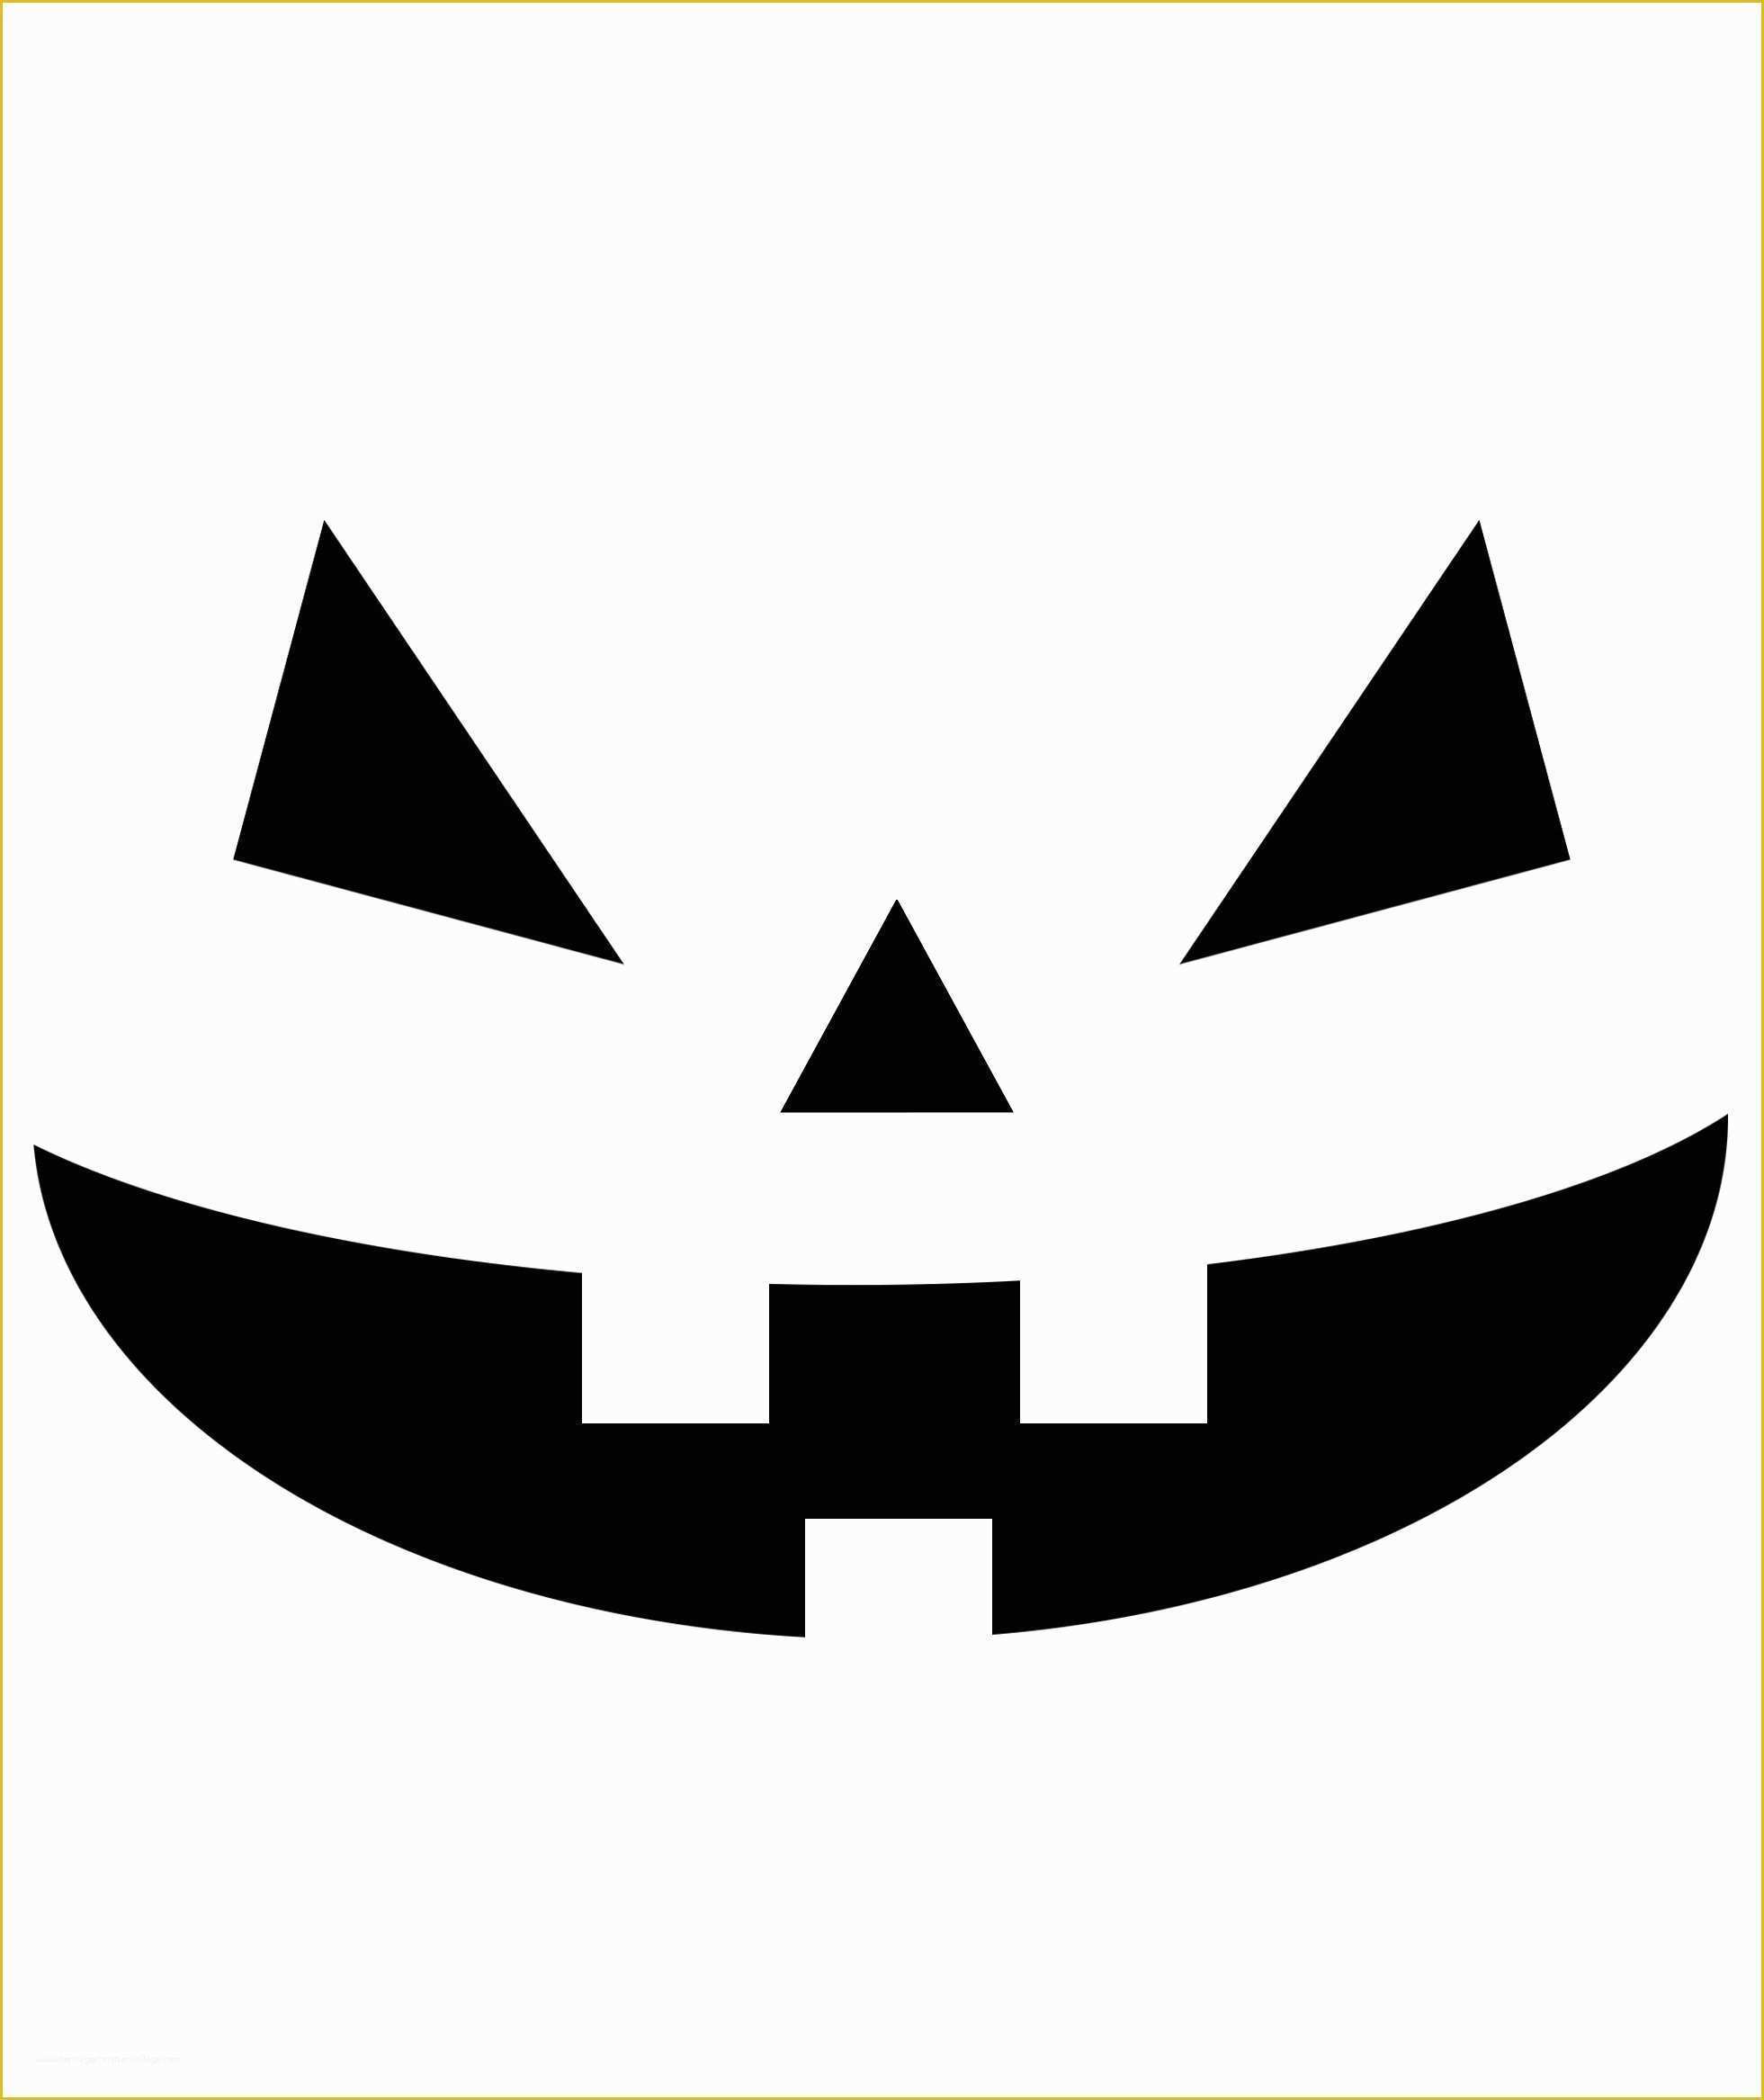 pumpkin-carving-ideas-templates-free-of-10-free-halloween-scary-cool